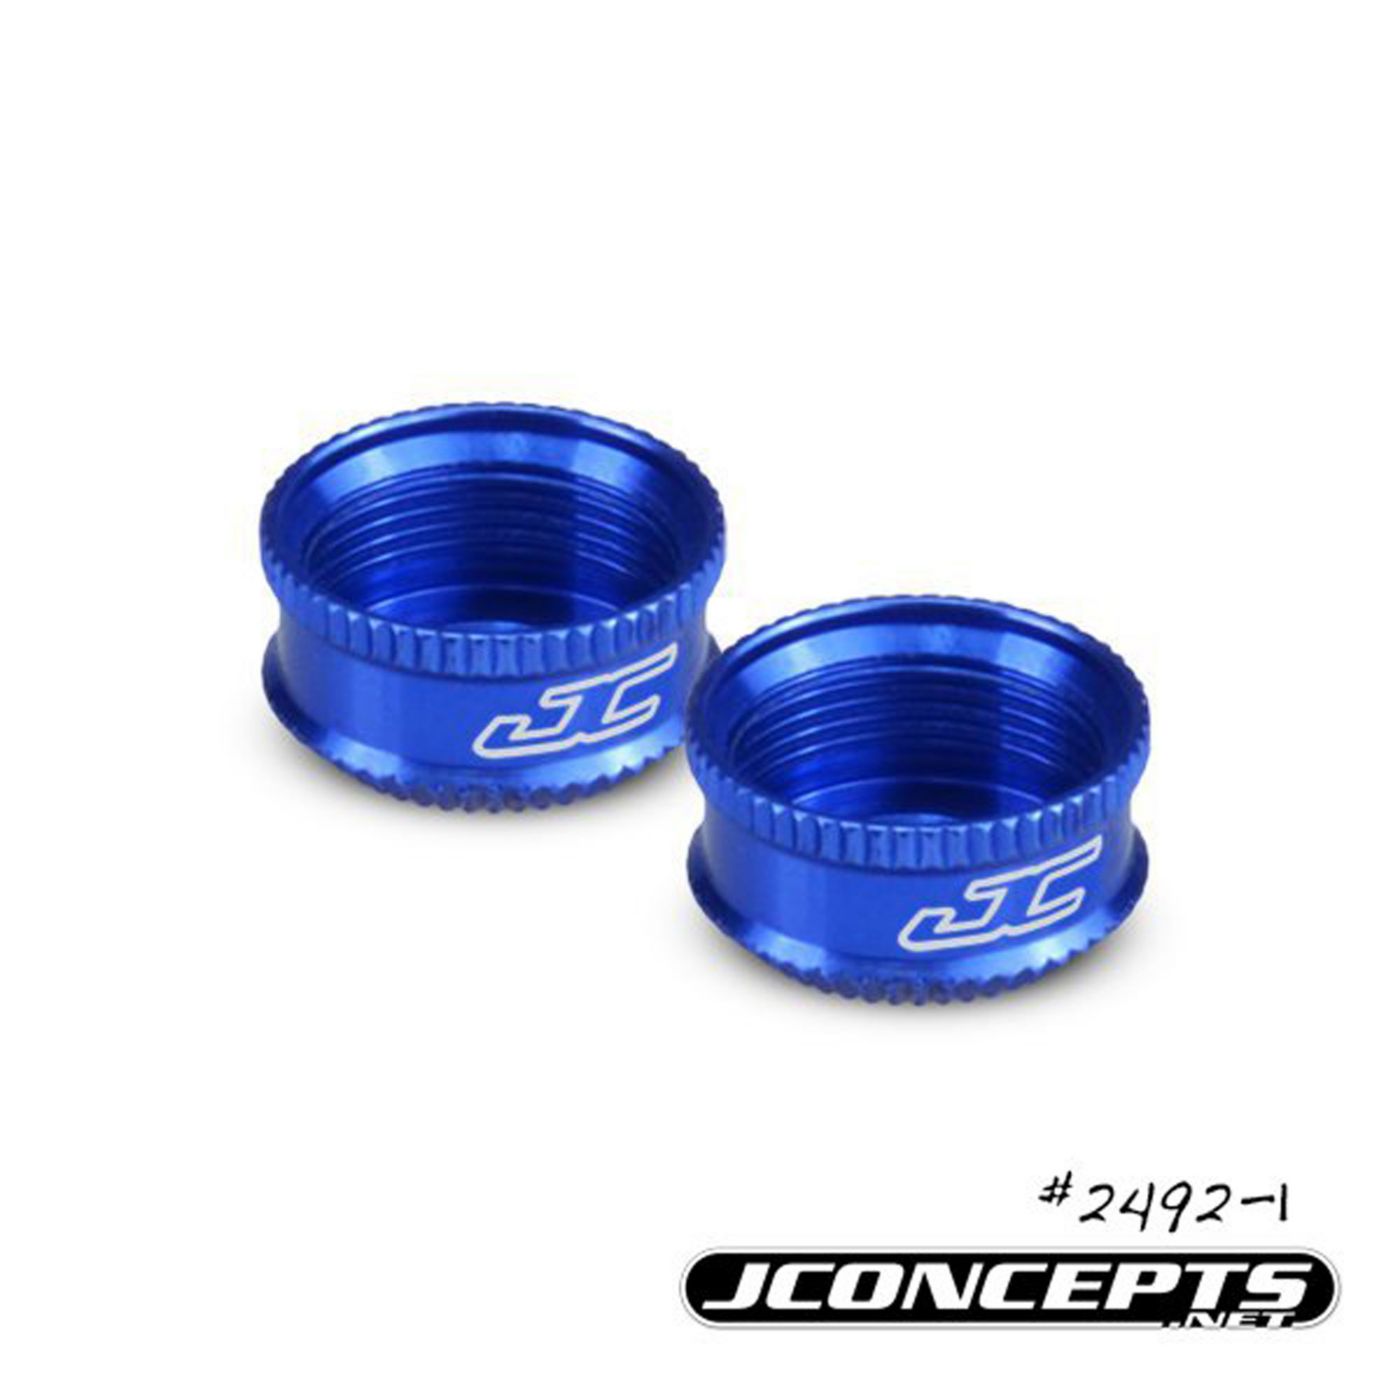 JConcepts 5.5/7.0mm Combo Thumb Wrench Blue Jco25561 for sale online 